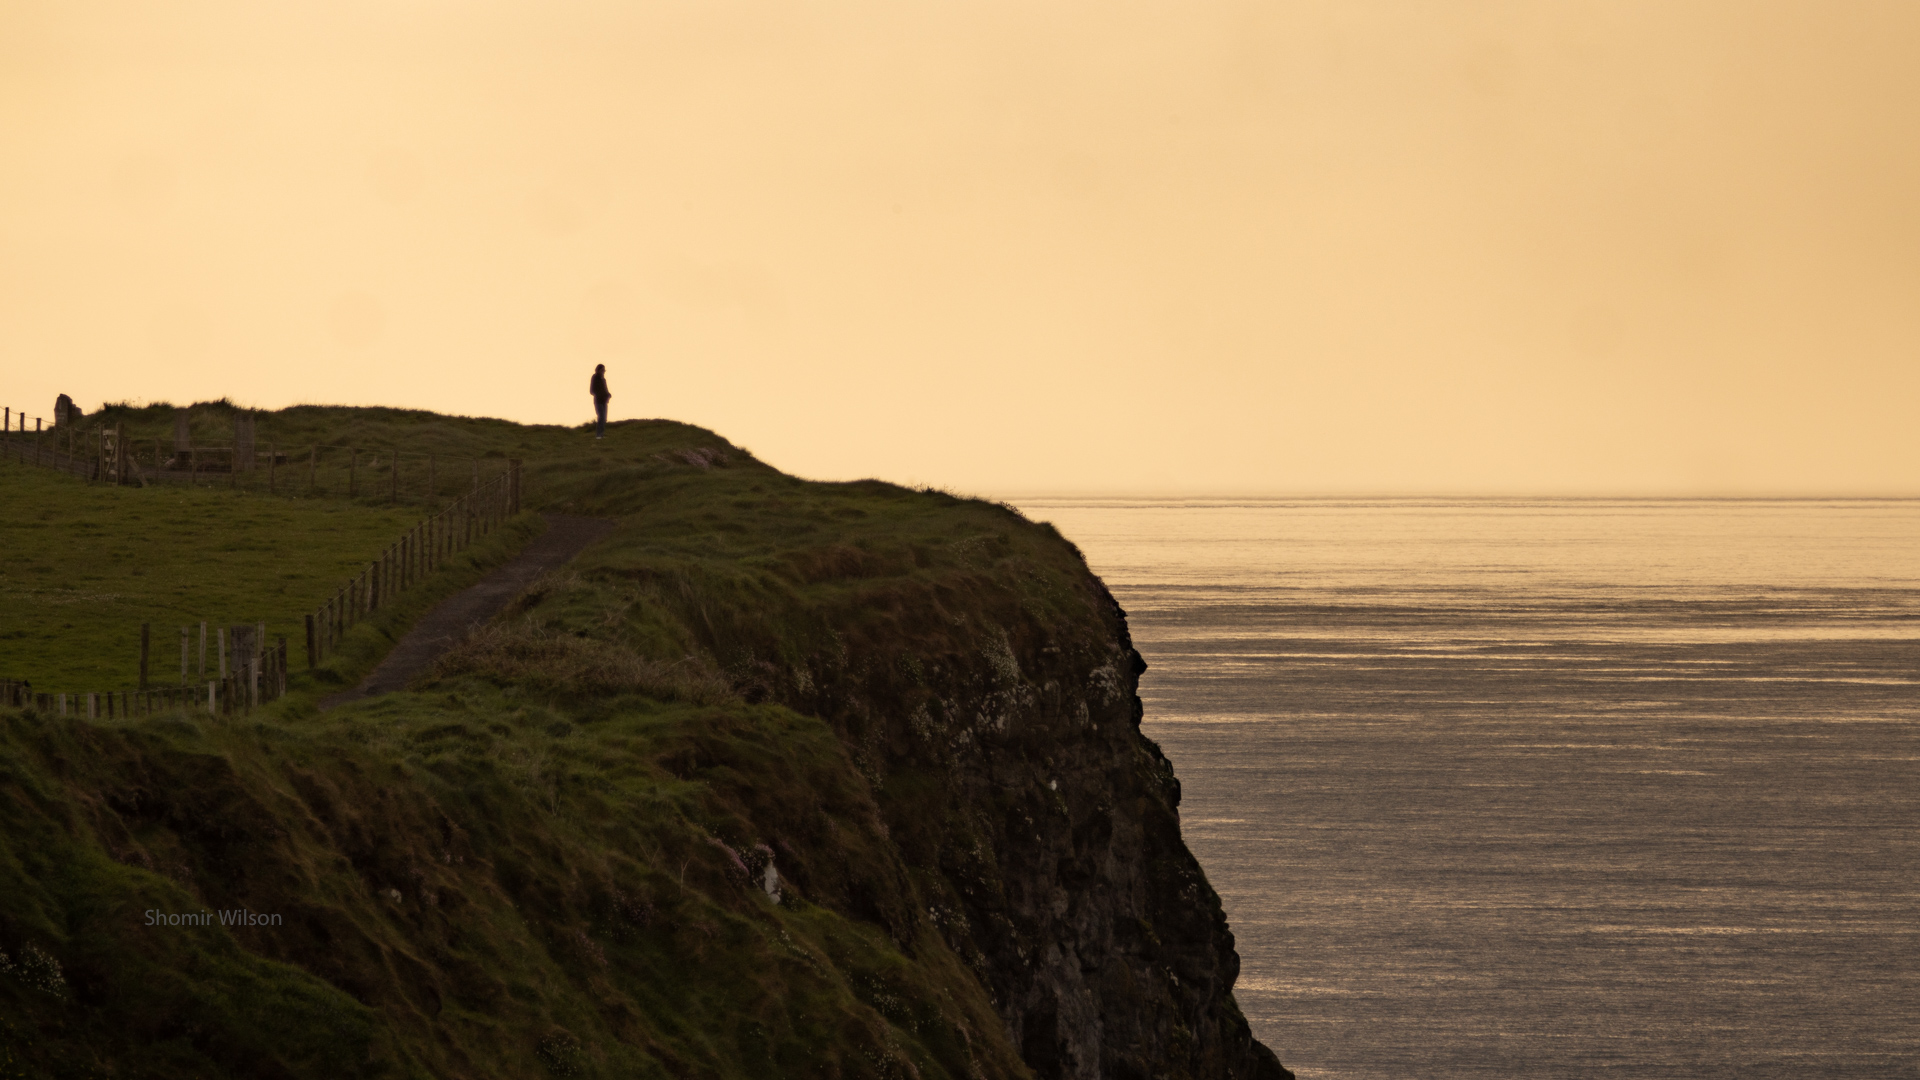 slihouette of a person on a tall cliff with the sea in the background; gentle orange sunset colors